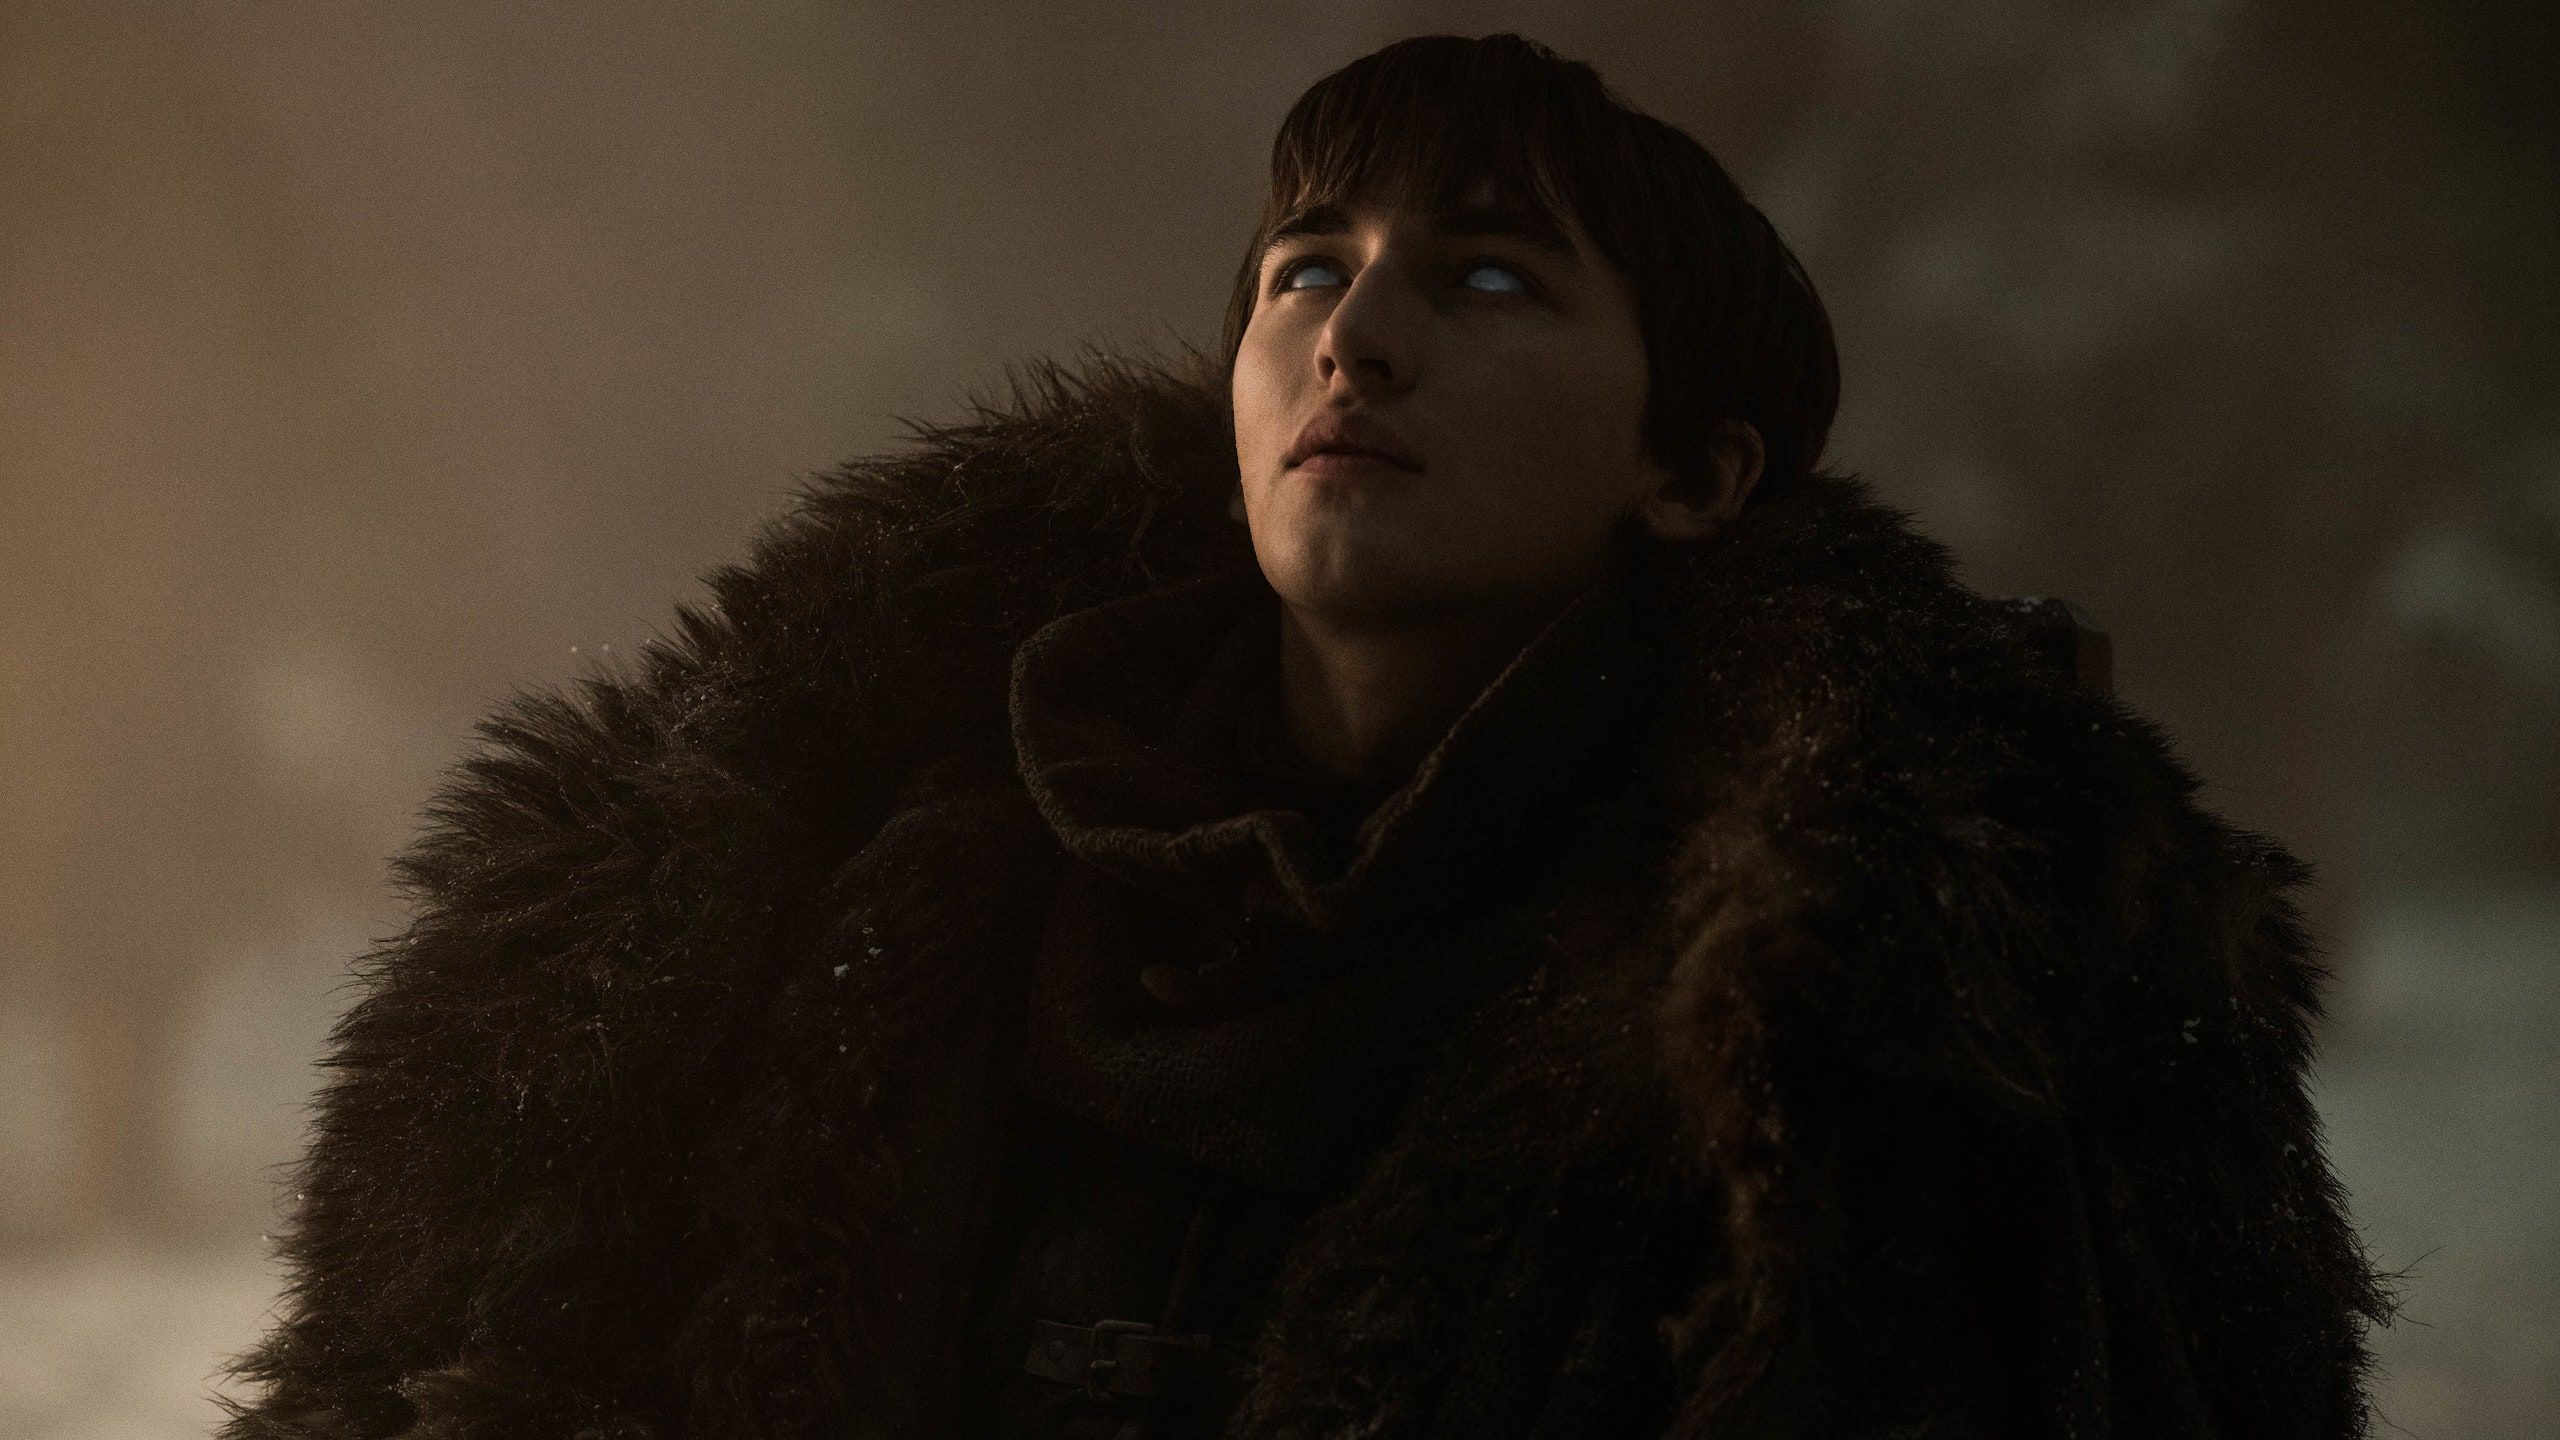 This 'Game of Thrones' Theory Suggests Bran Stark Is Actually